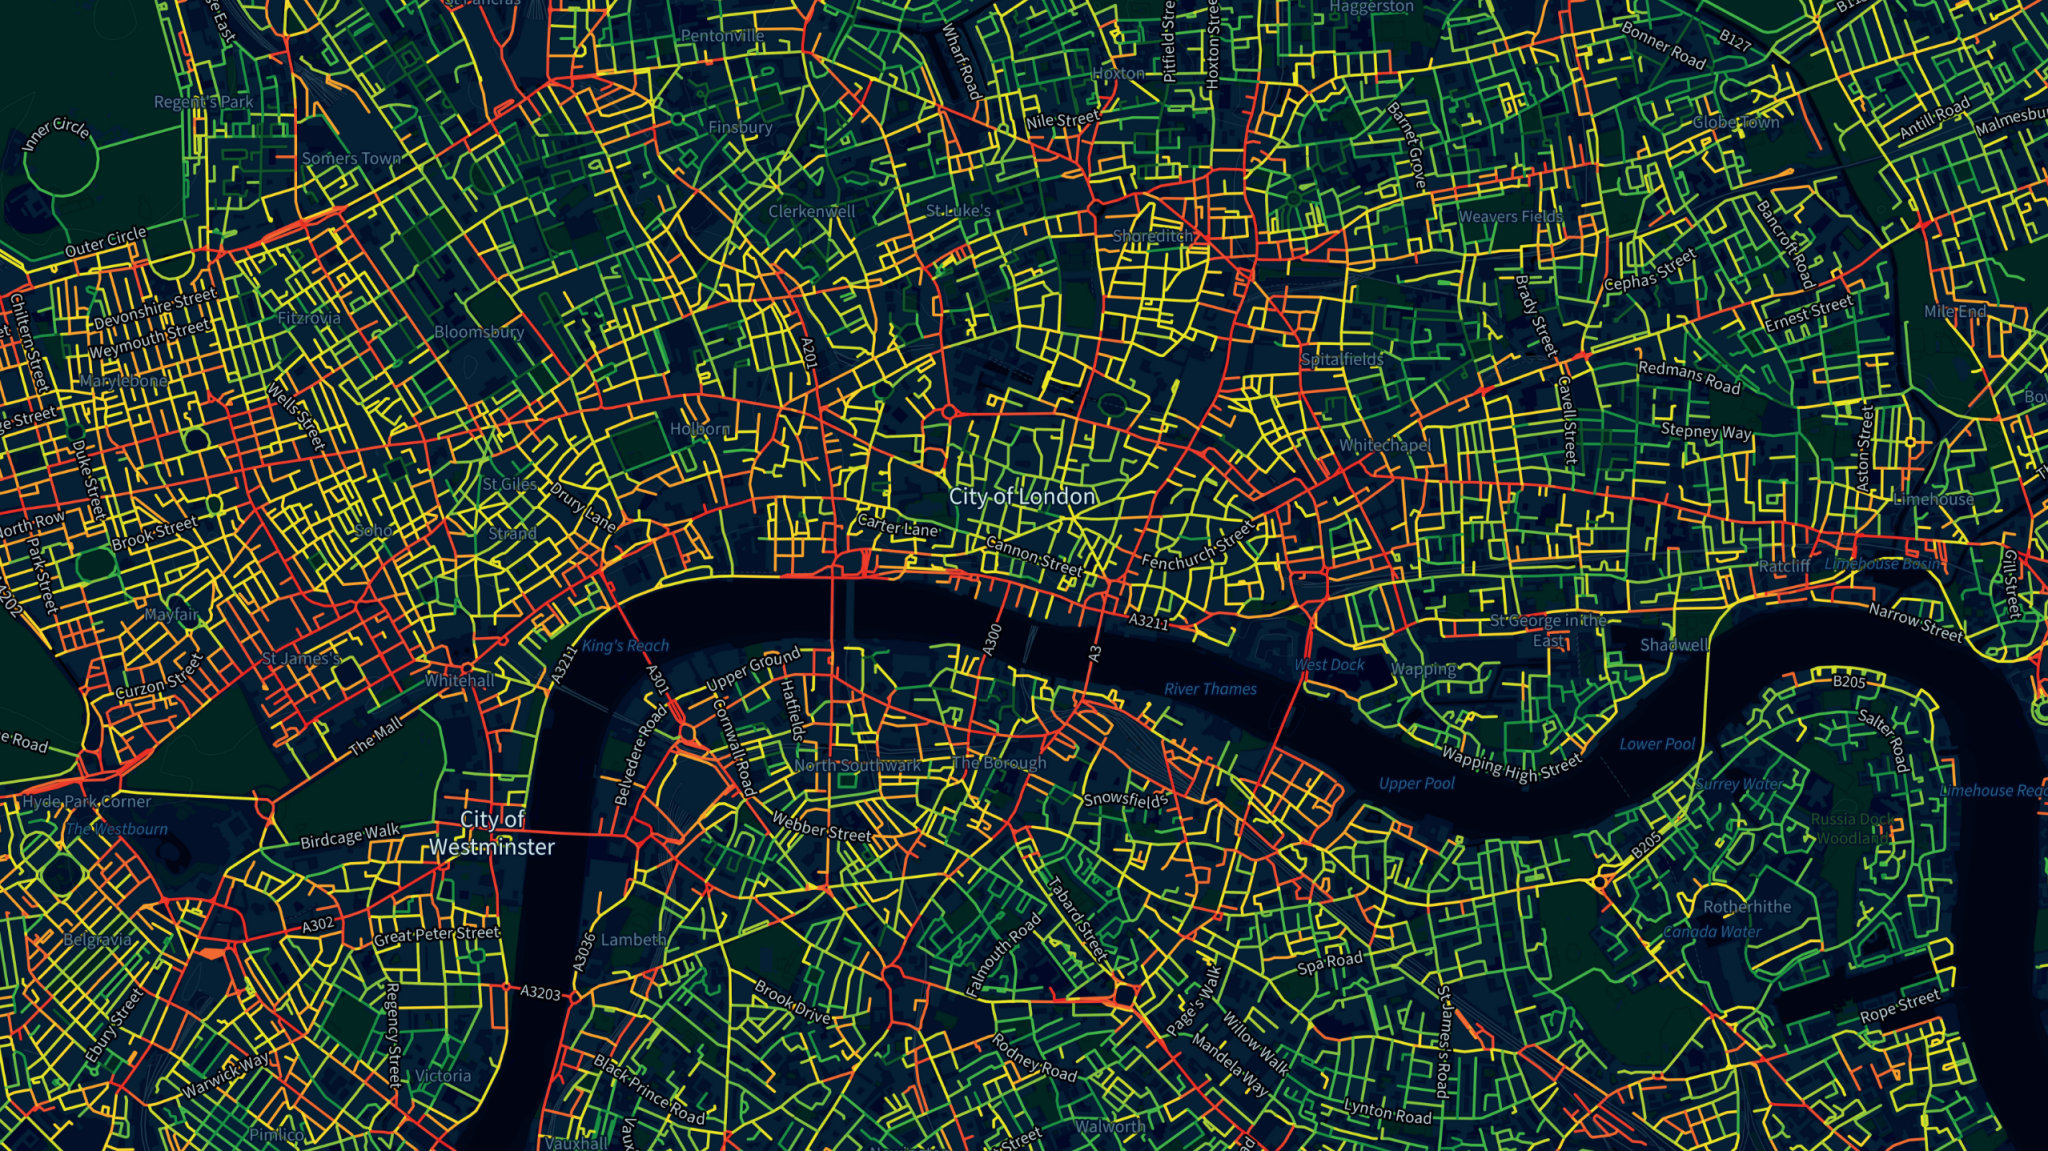 London map, veined with red streets around clusters of green and yellow streets